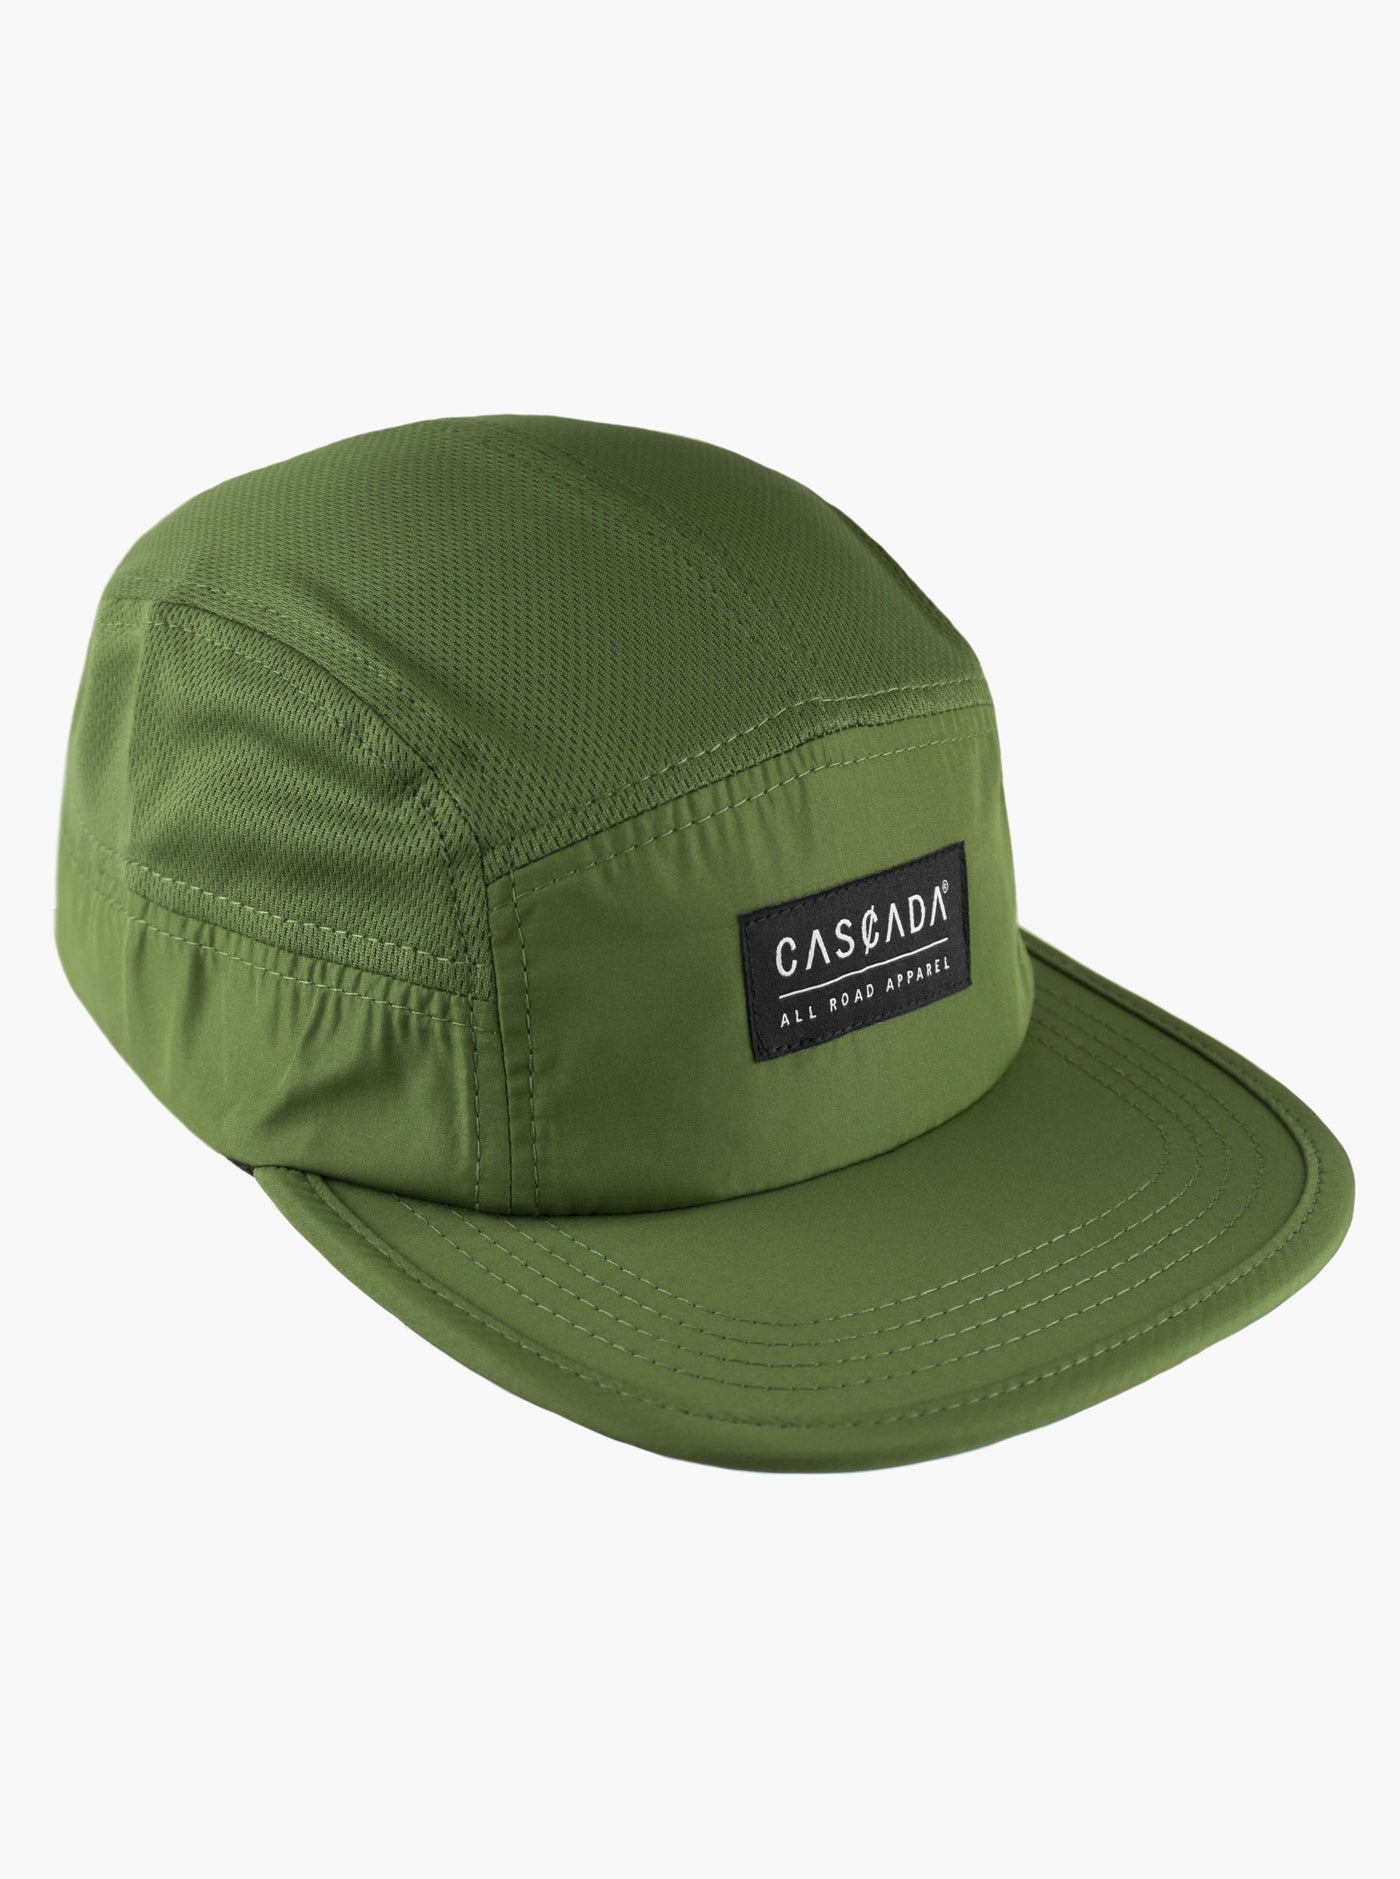 4 Panel Hiking Hat with Flap Wide Brim, Olive 